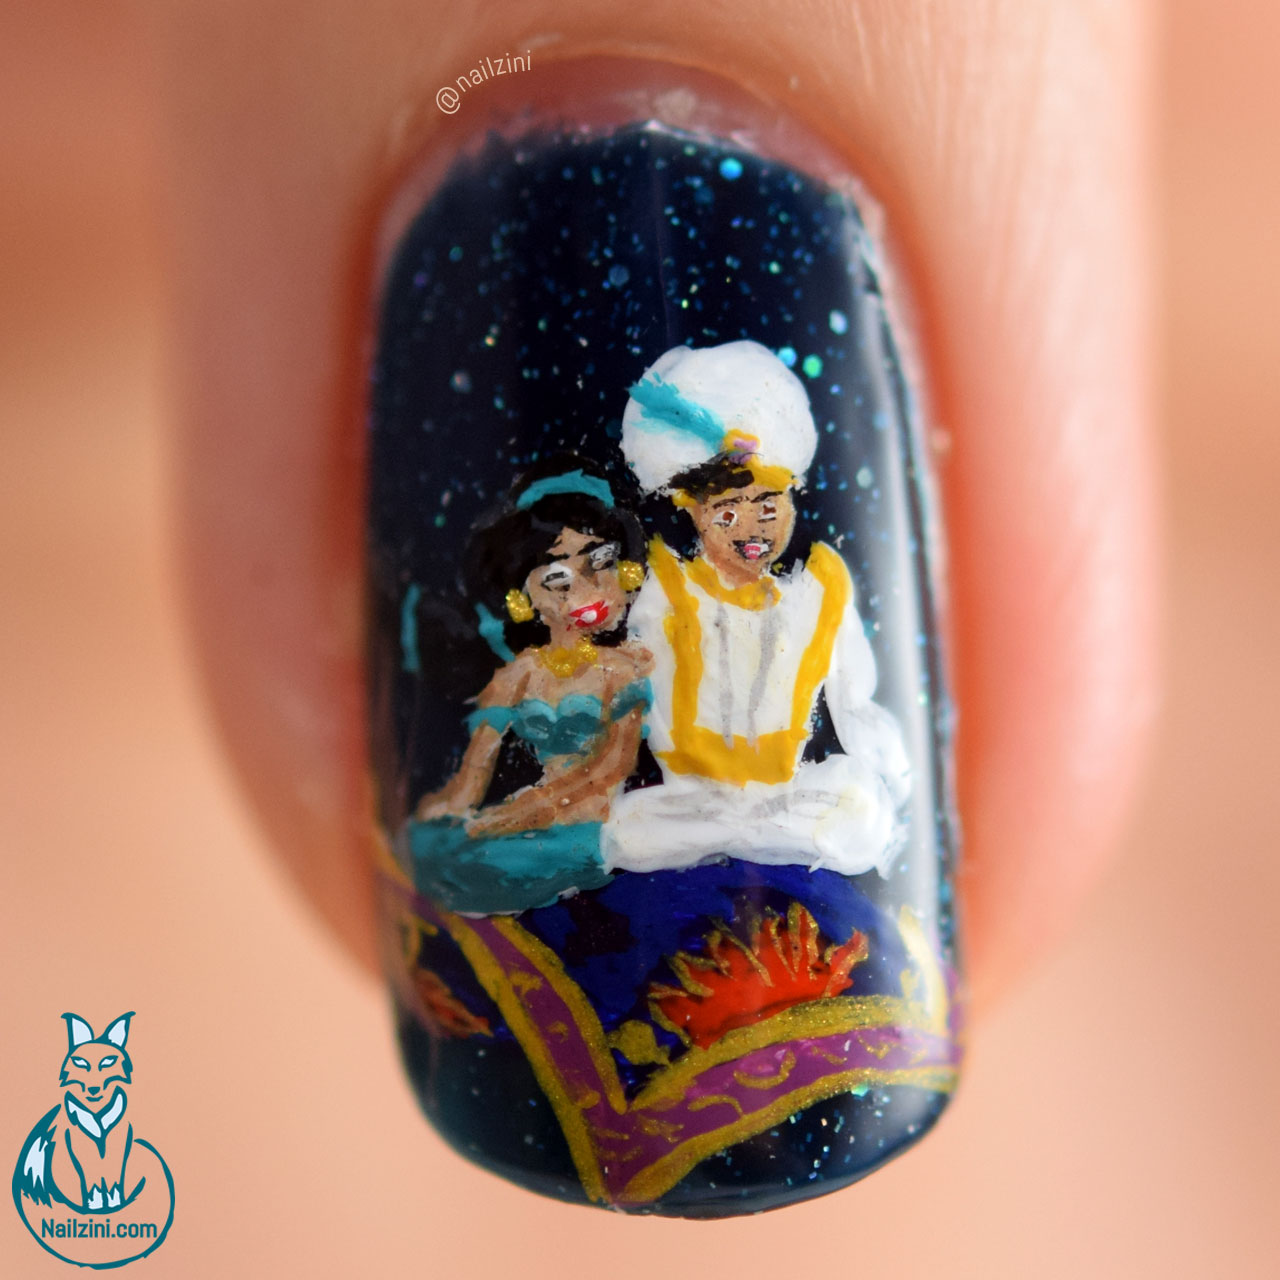 Aladdin Inspired Nails Part 3 - The Lamp - Worst Client Ever - YouTube